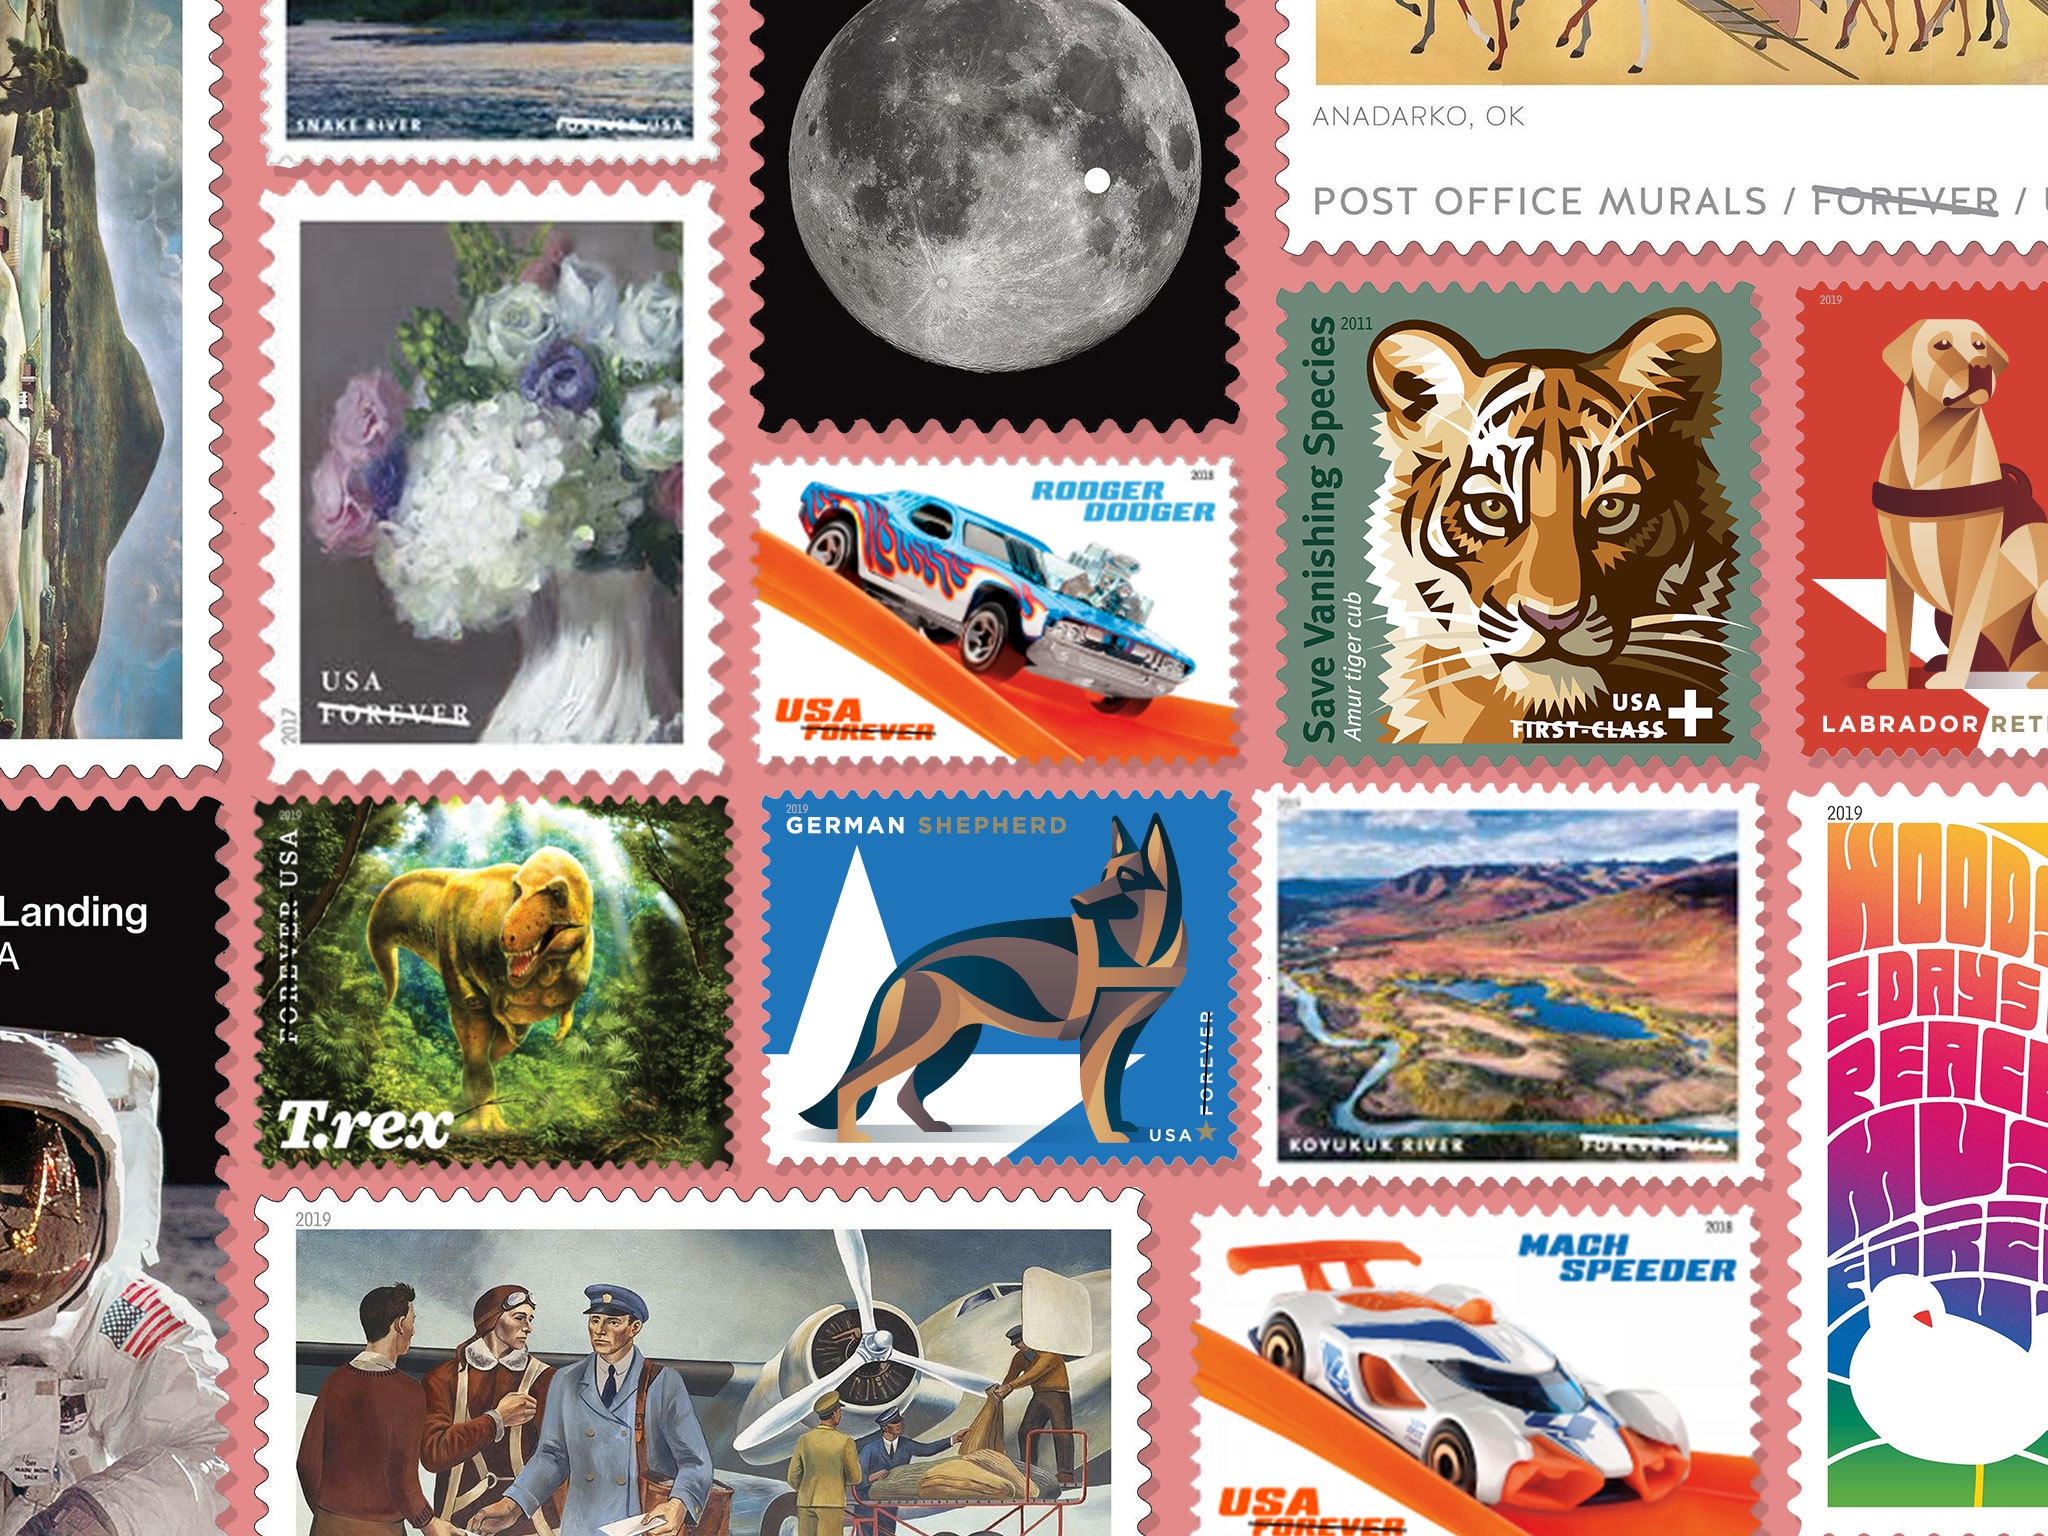 You have two days left to buy stamps with your face (or your pet's